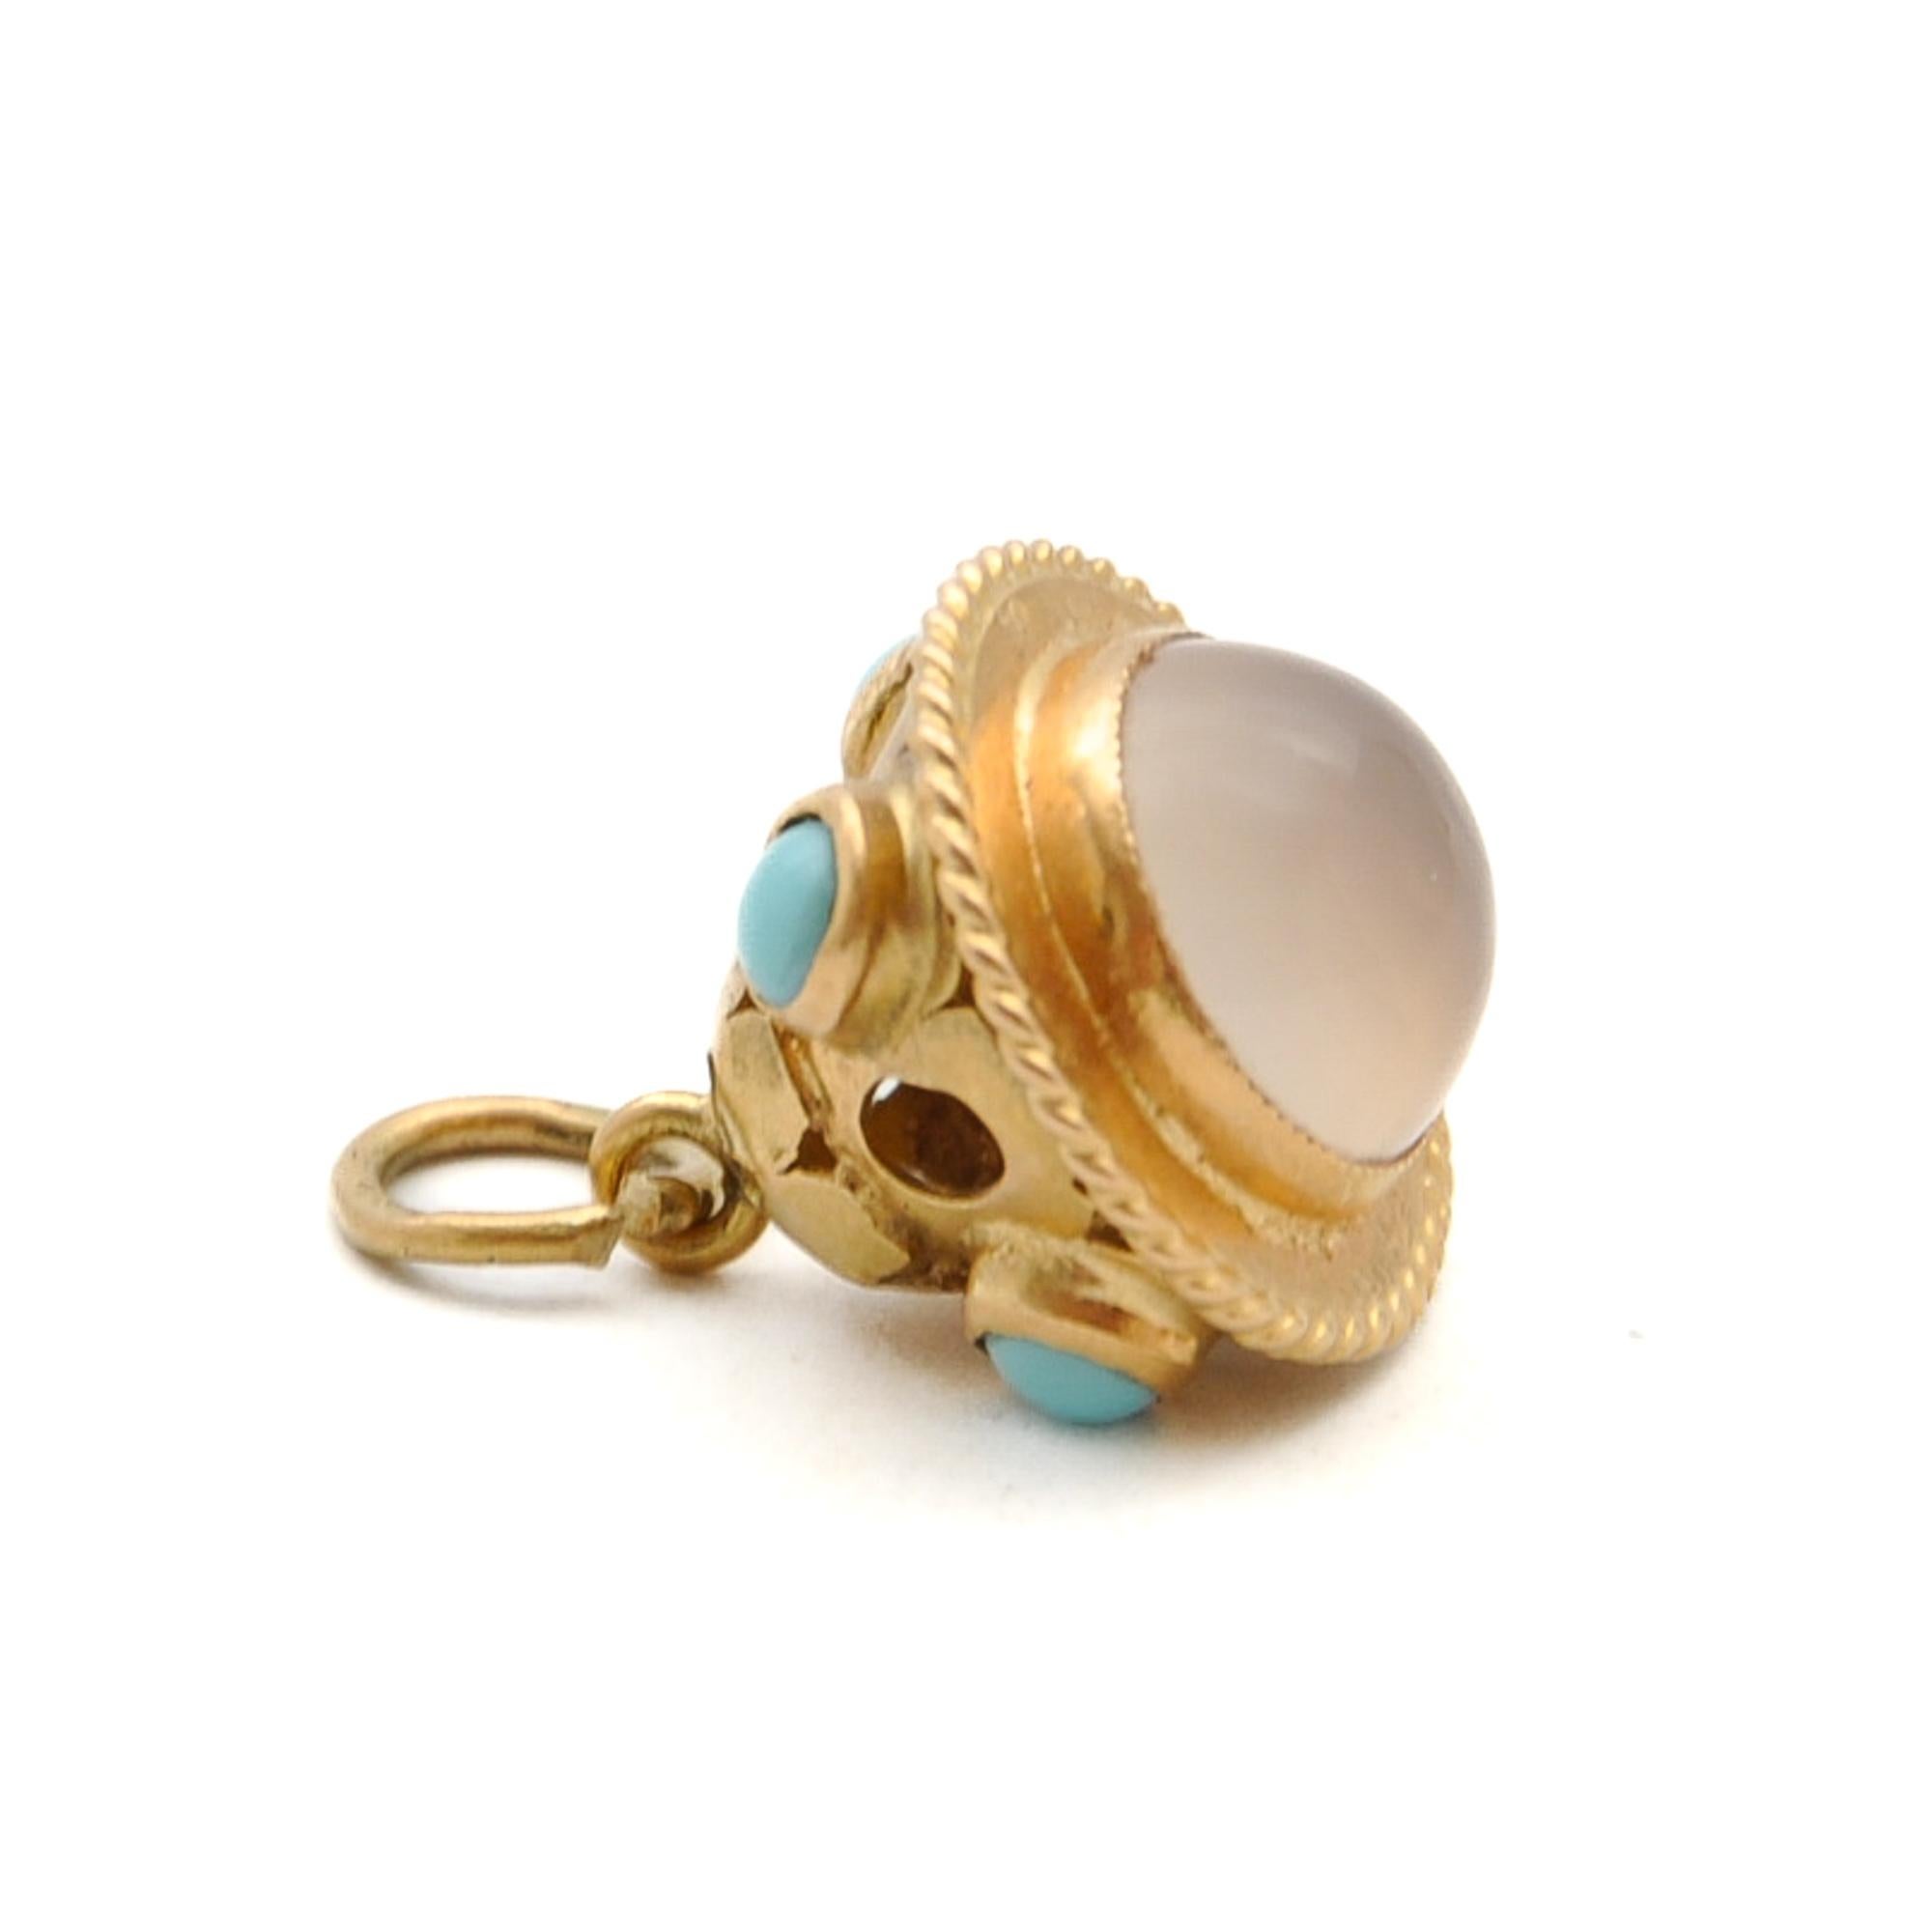 Vintage 18K Gold Turquoise and Moonstone Charm Pendant For Sale 2